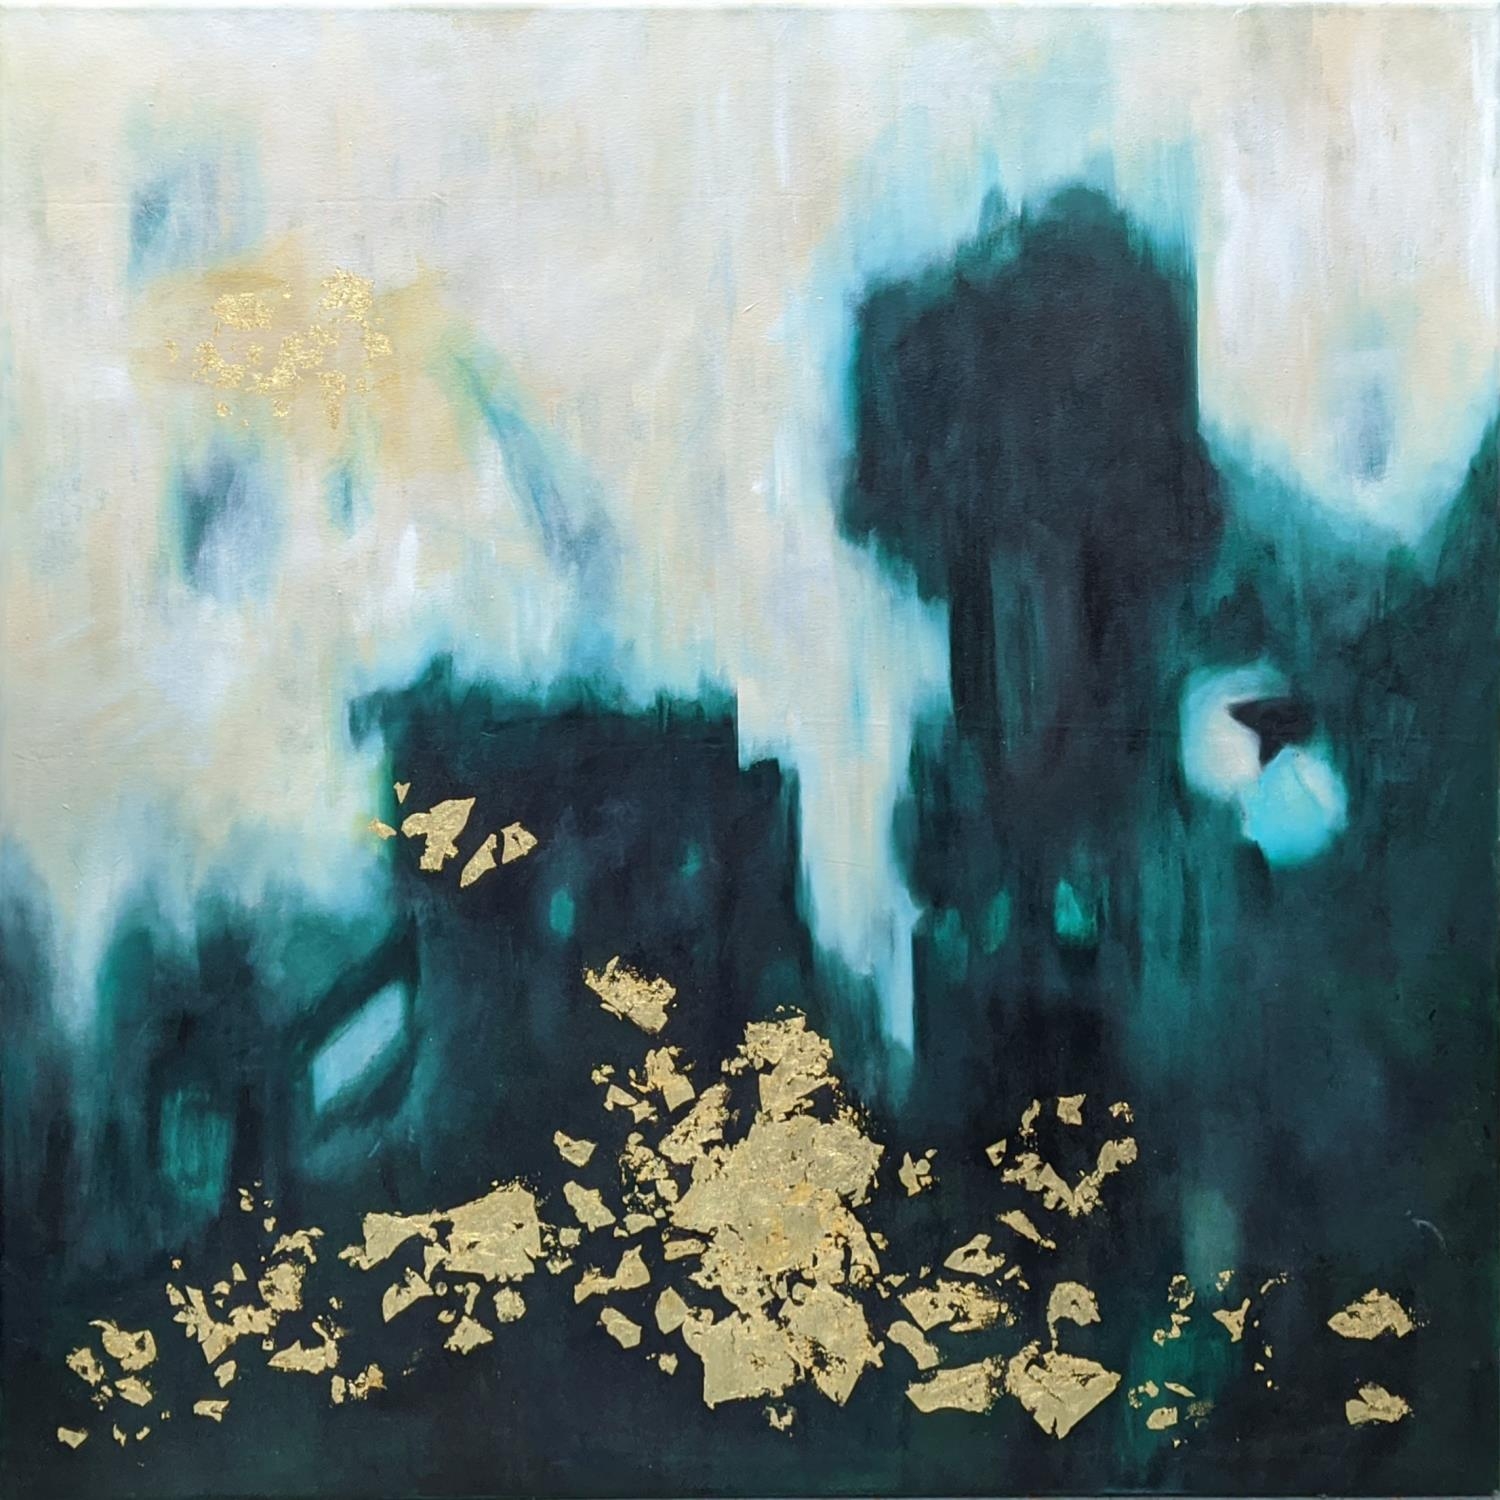 OIL ON CANVAS CONTEMPORARY SCHOOL ABSTRACT, aquamarine with 125cm x 125cm, gilt detail.